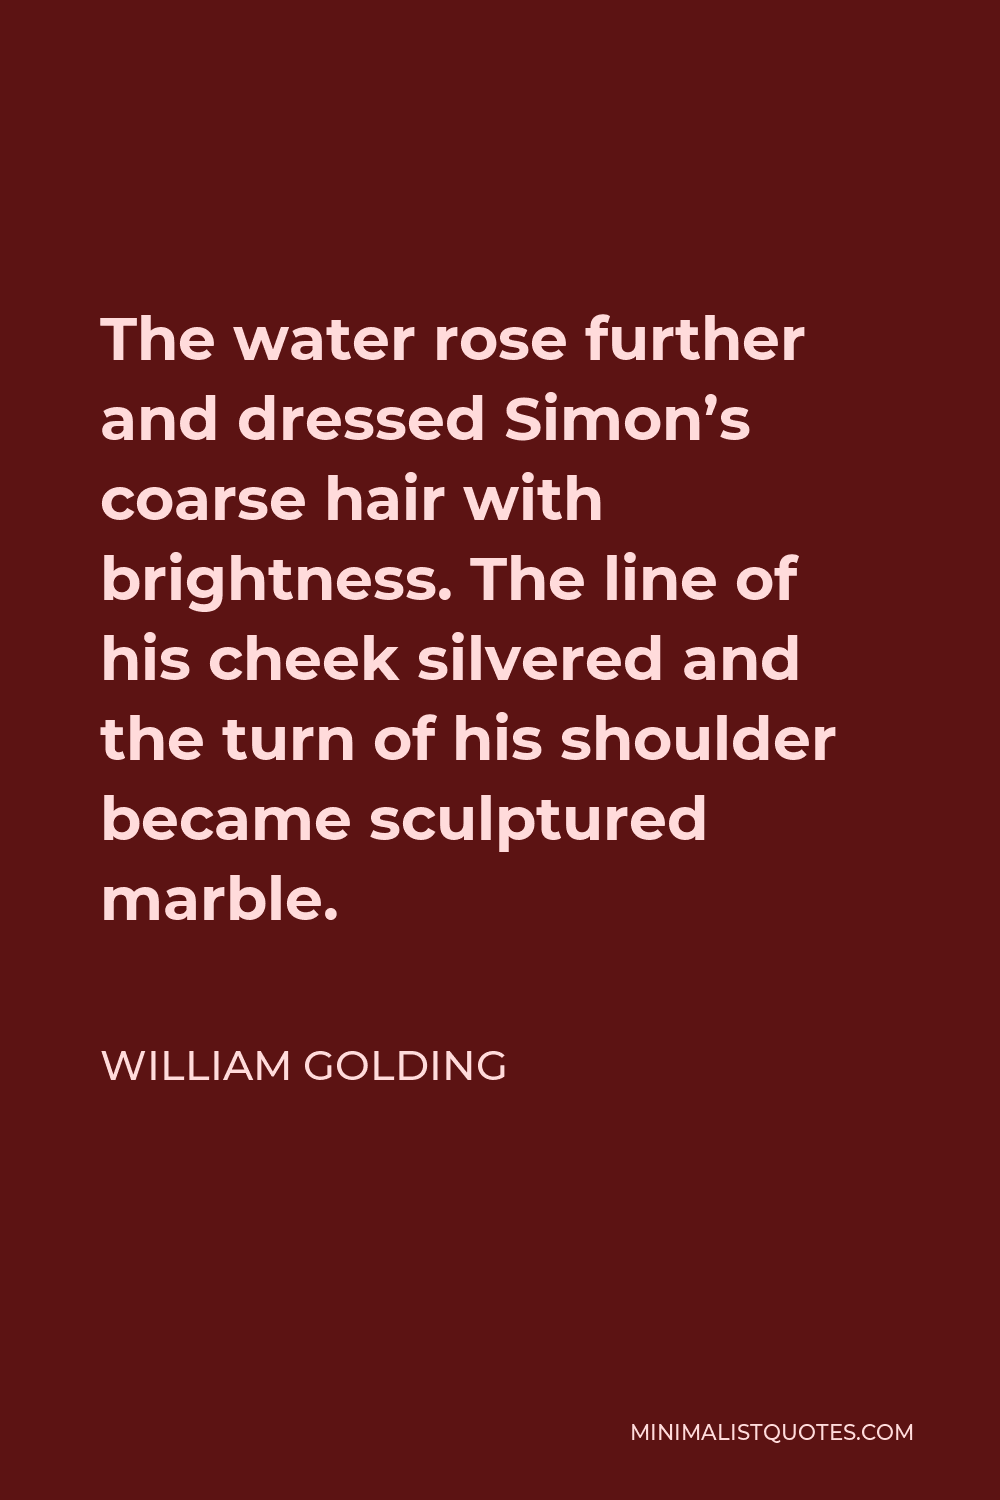 William Golding Quote - The water rose further and dressed Simon’s coarse hair with brightness. The line of his cheek silvered and the turn of his shoulder became sculptured marble.